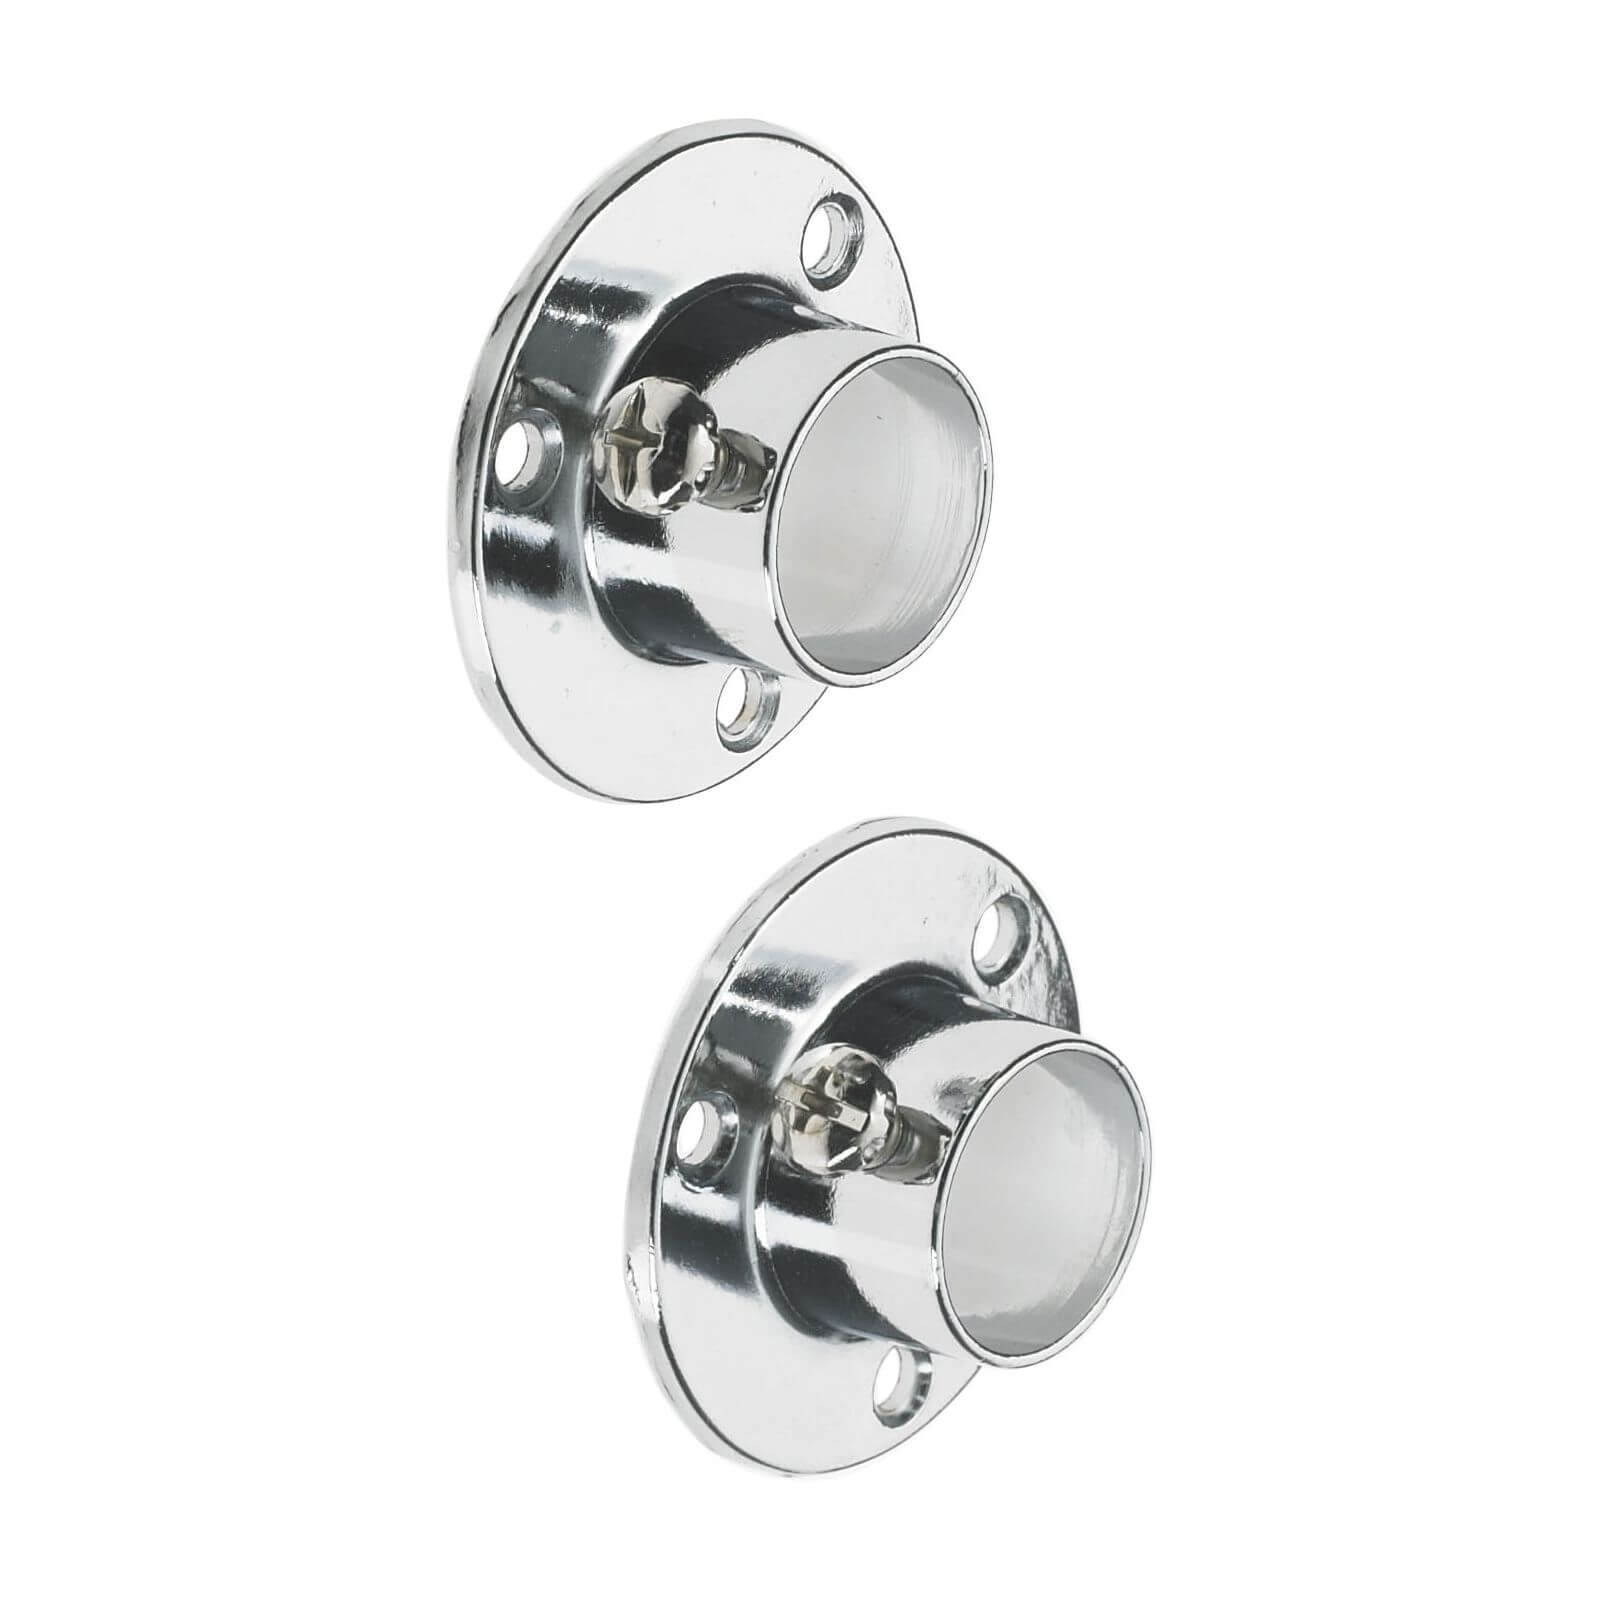 Super Deluxe Sockets 19mm Chrome Plated